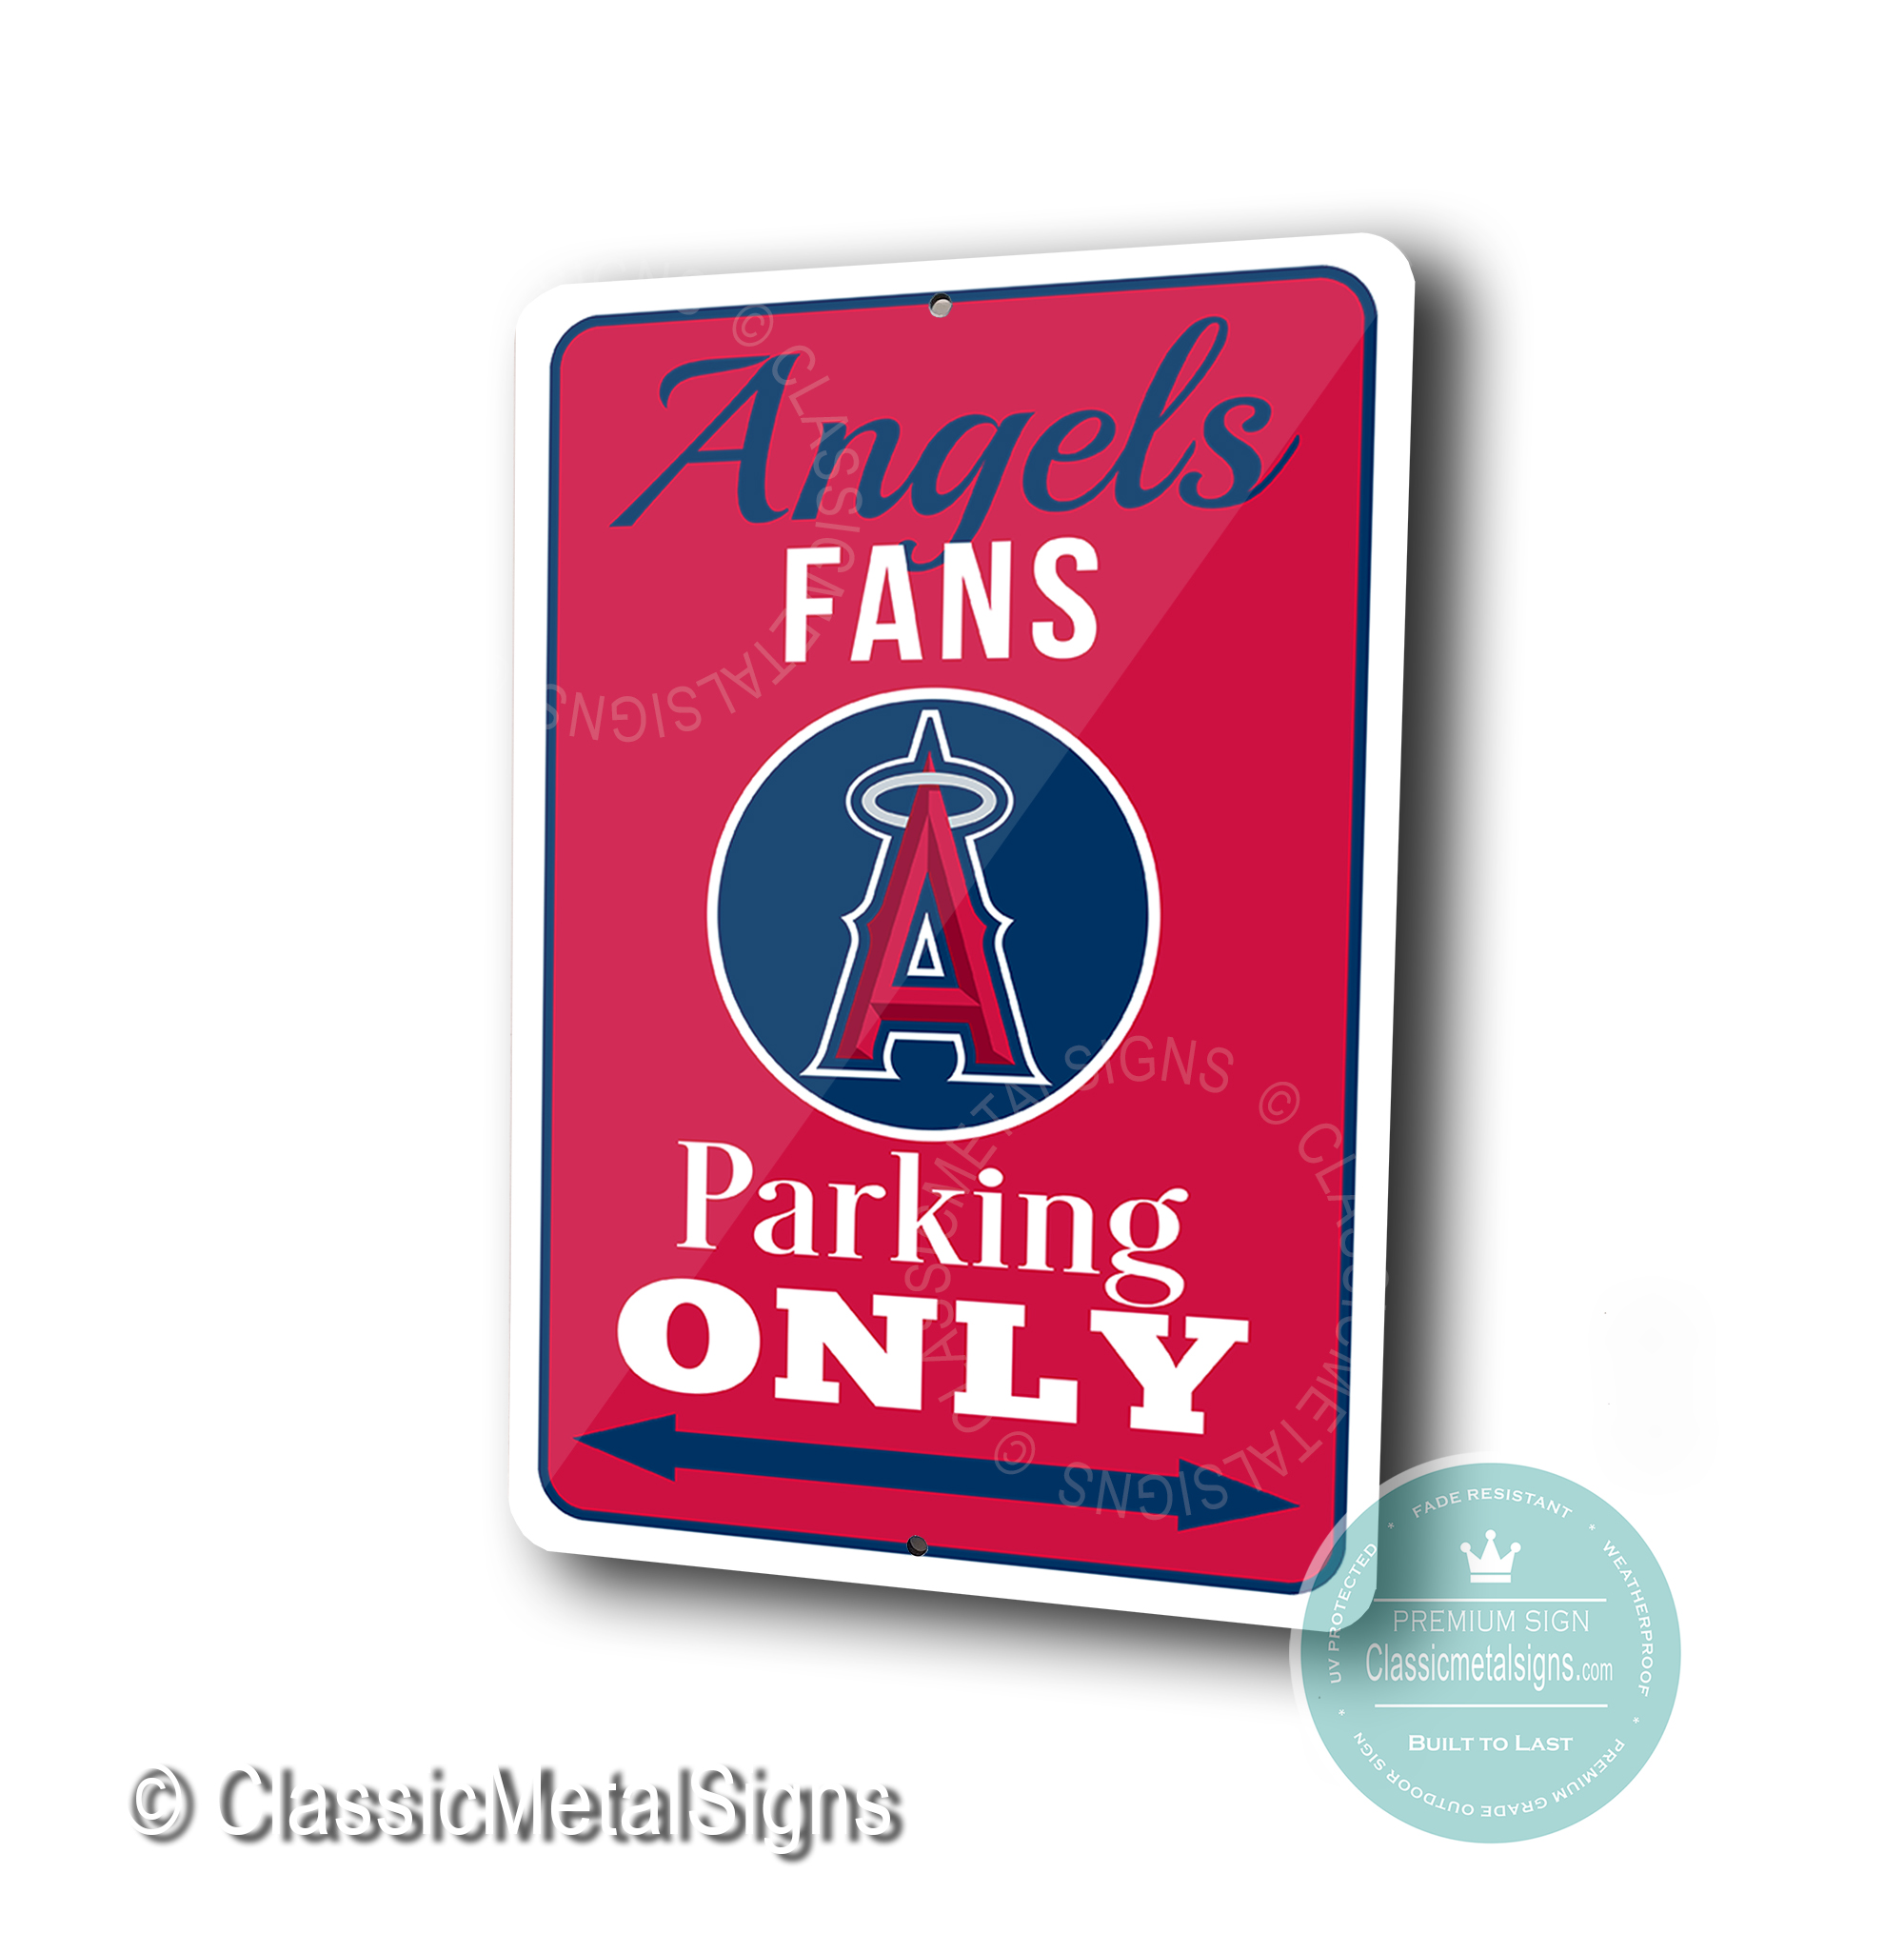 LA Angels Parking Only Signs